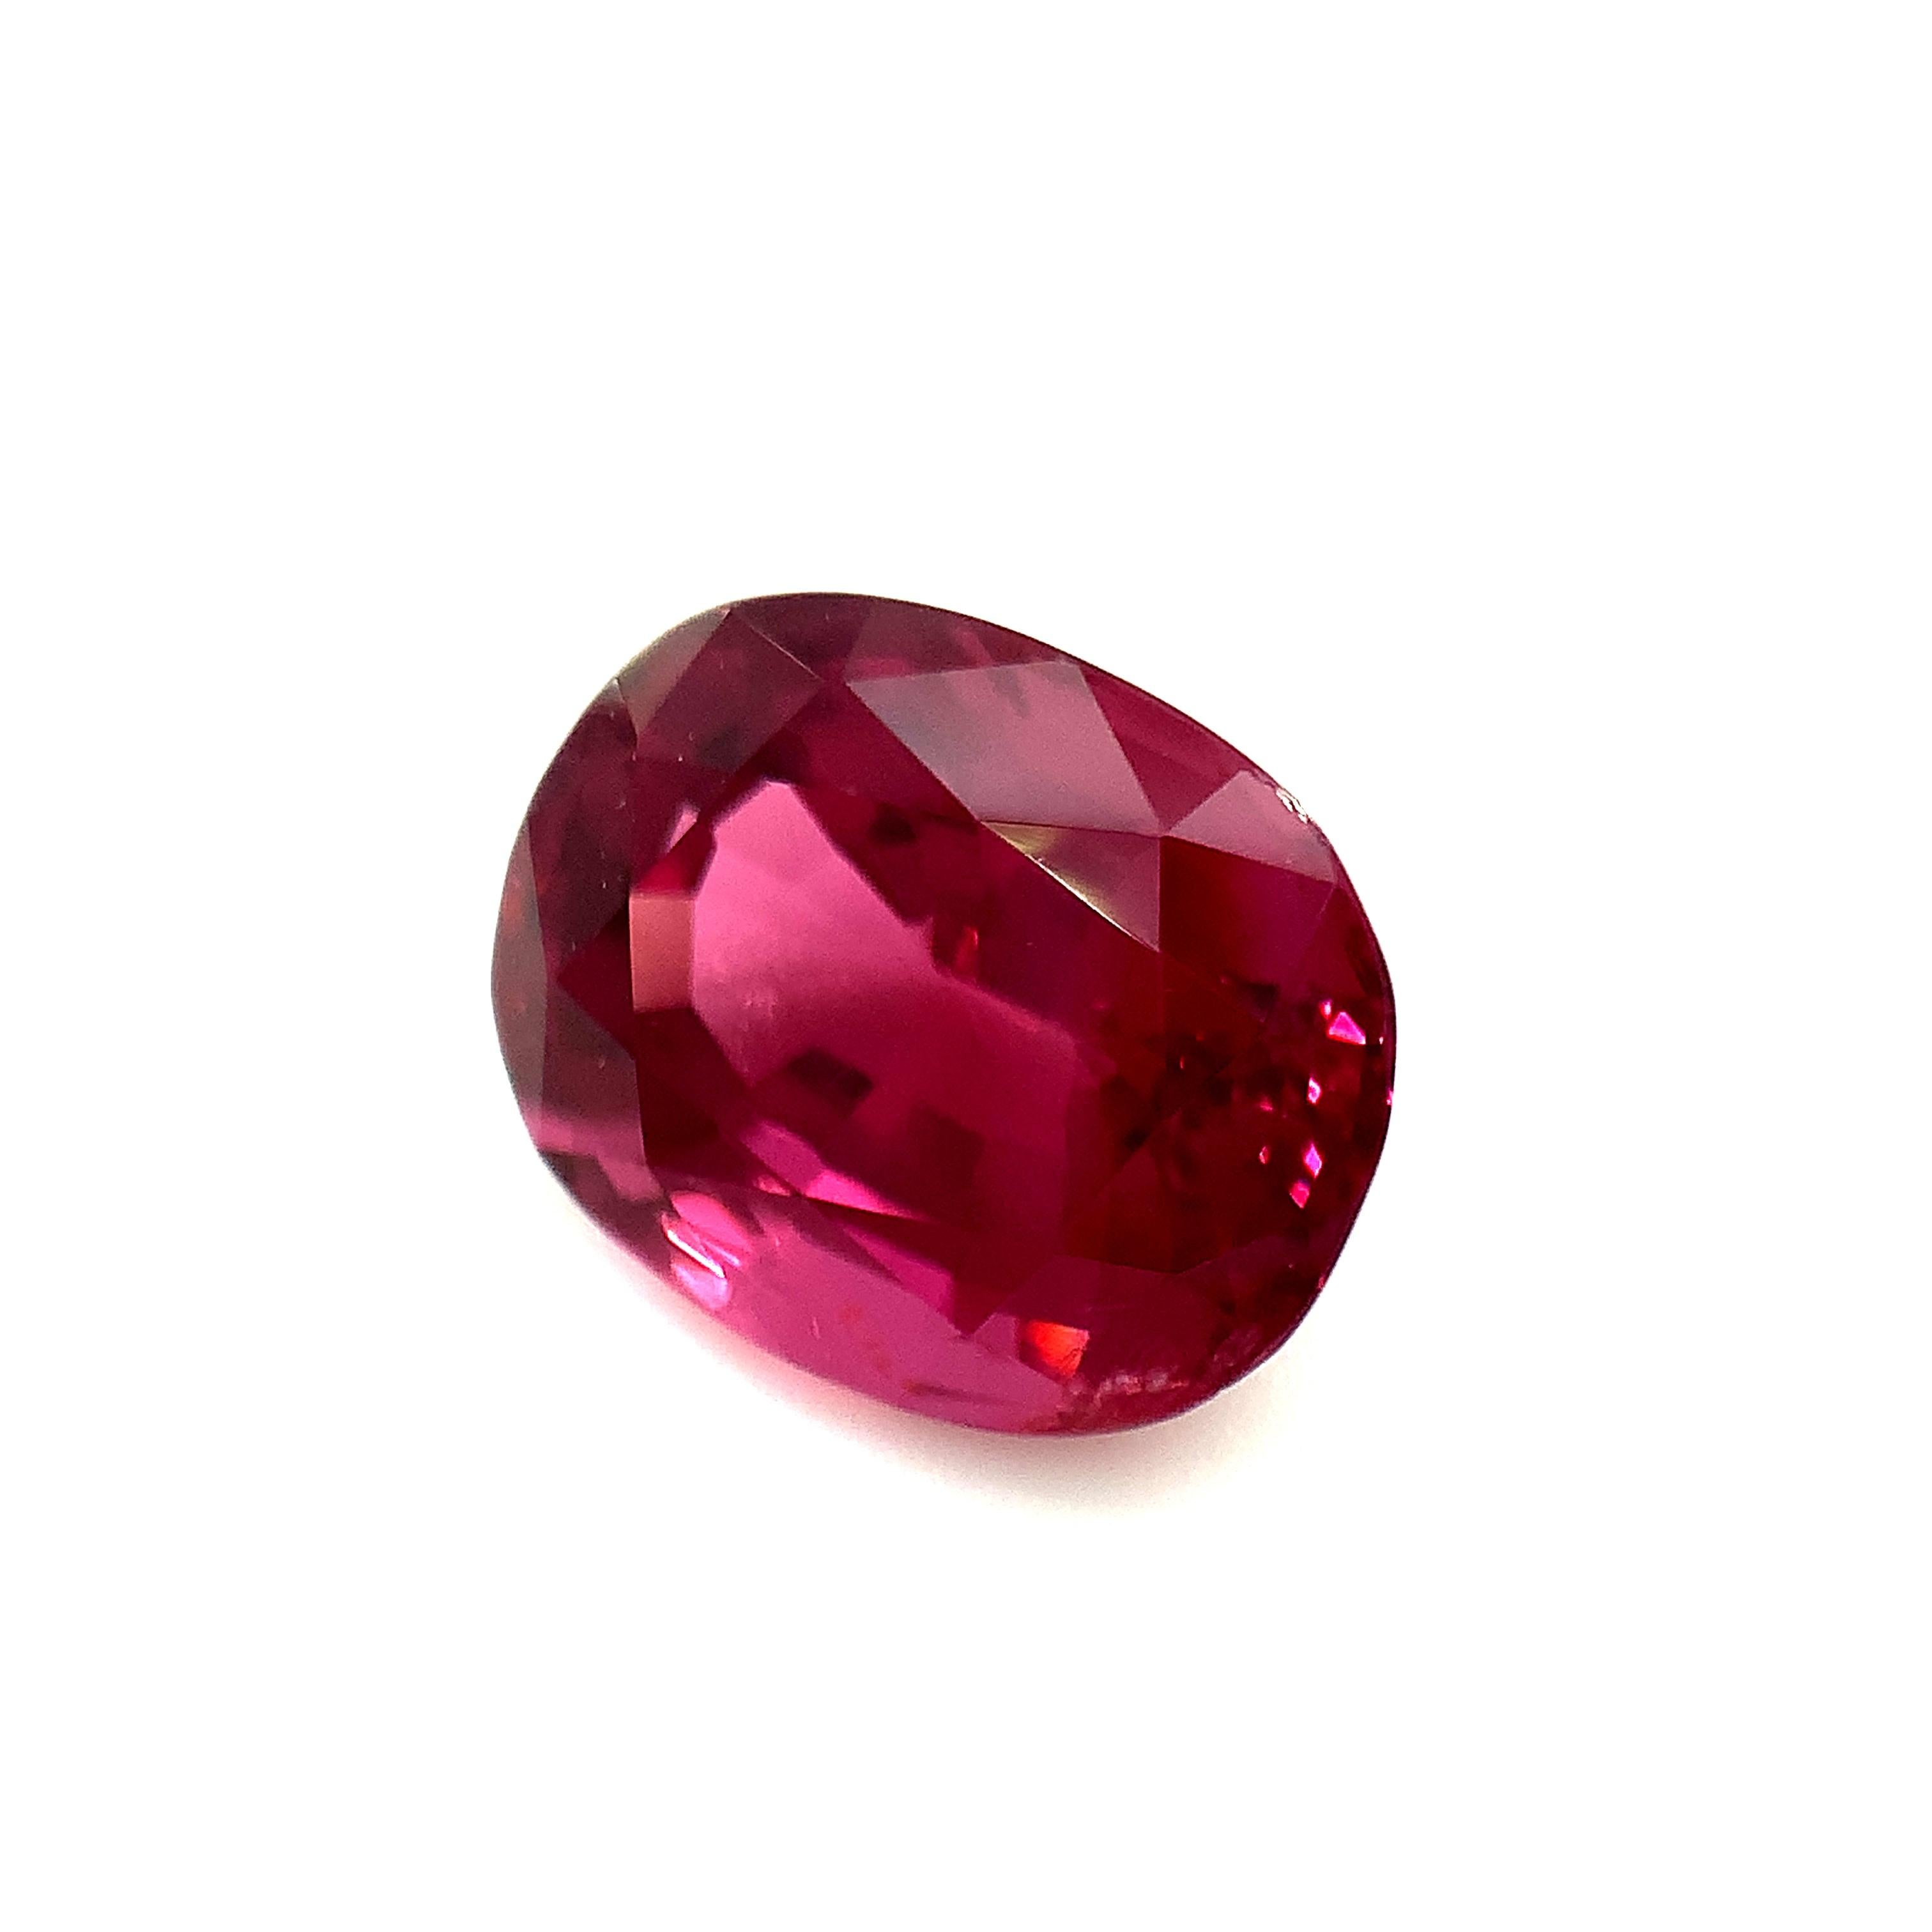 Oval Cut Unheated 5.18 Carat Purple Pink Spinel, Loose Gemstone, GIA Certified